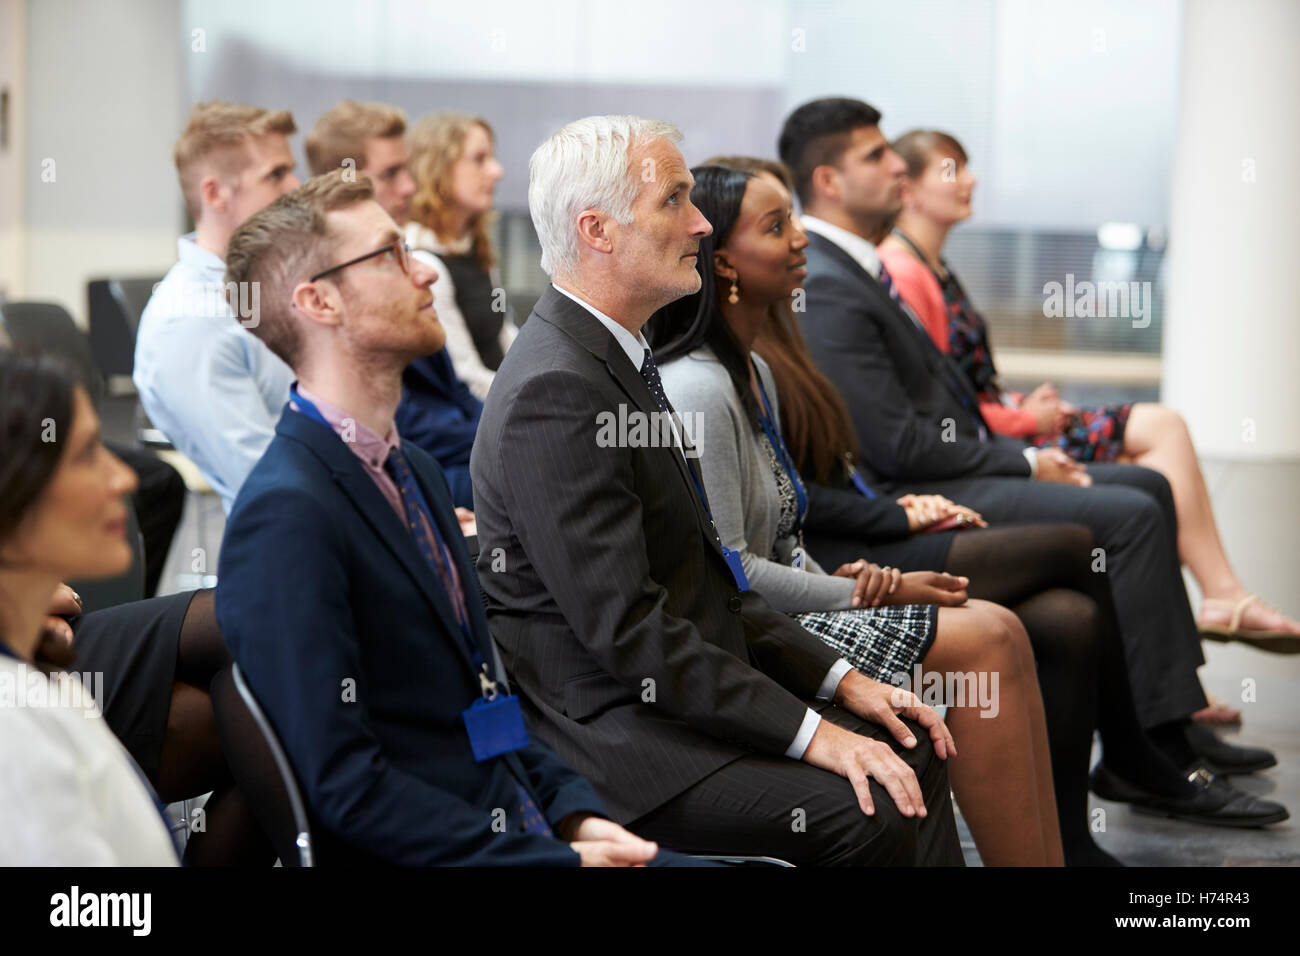 Audience Listening To  Speaker At Conference Presentation Stock Photo